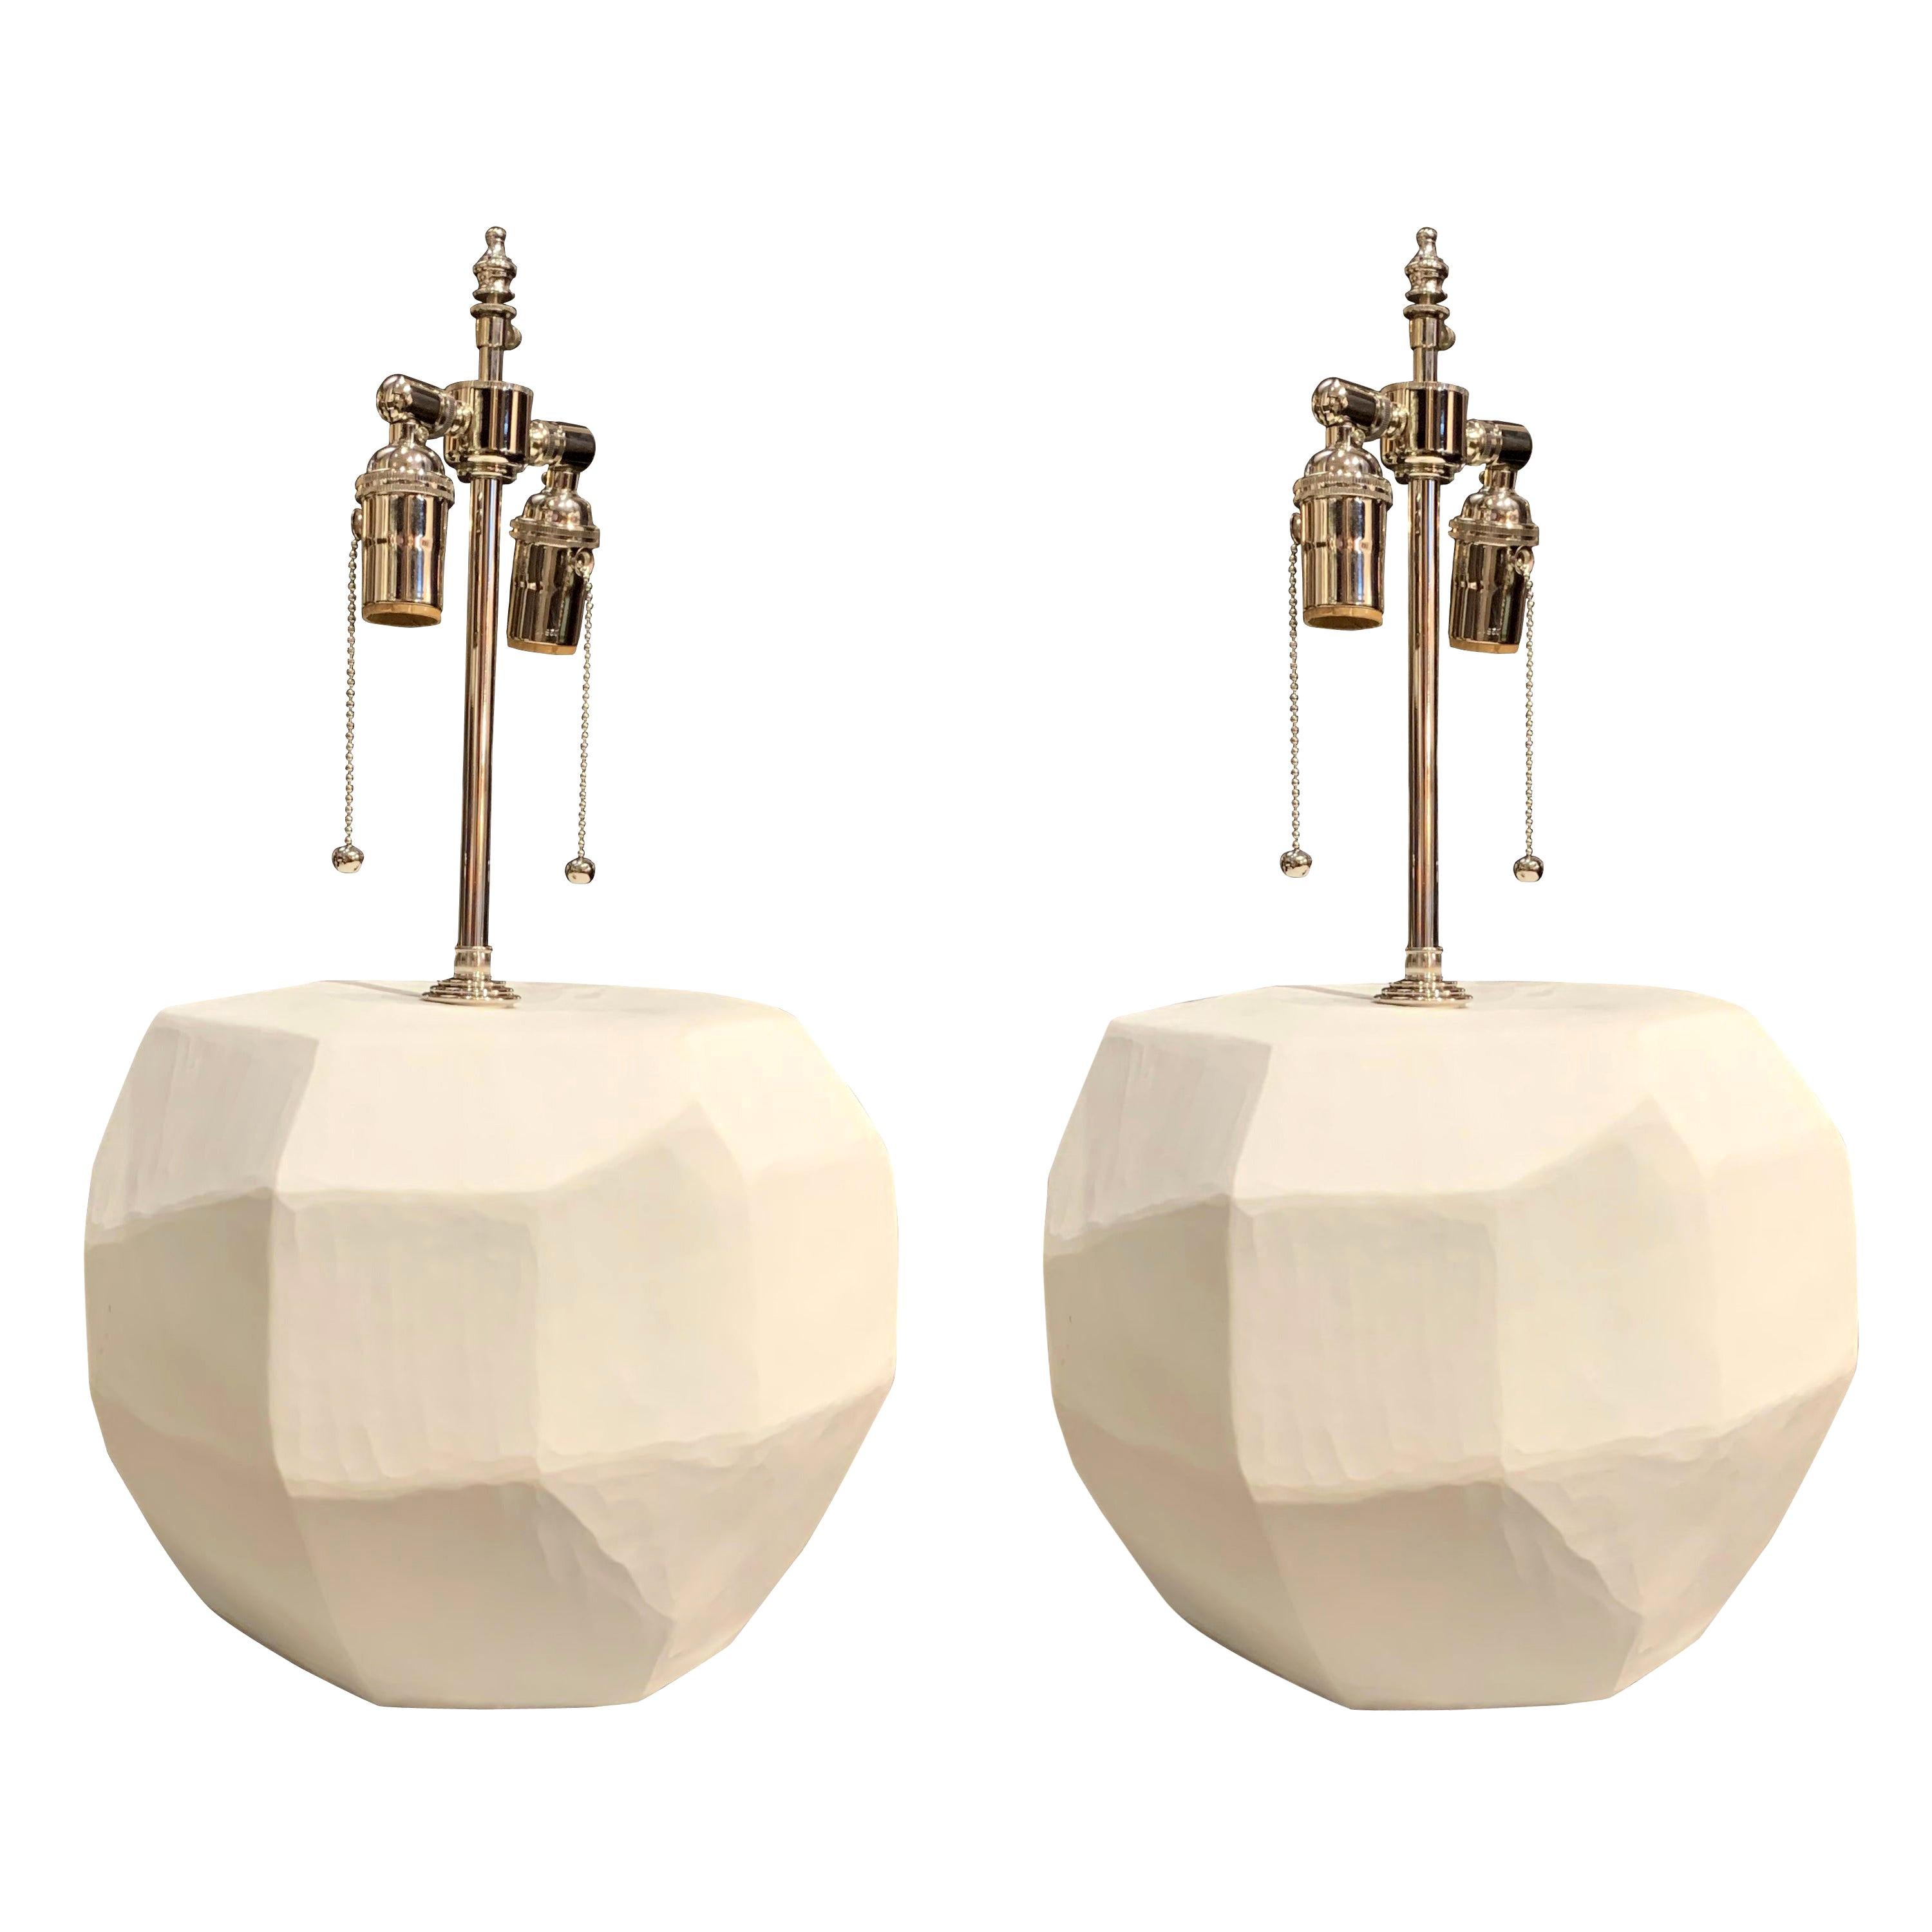 Contemporary Romanian matte white glass pair of lamps with cubist decorative shape.
The lamps are newly wired with two sockets.
Measures: Base diameter 11